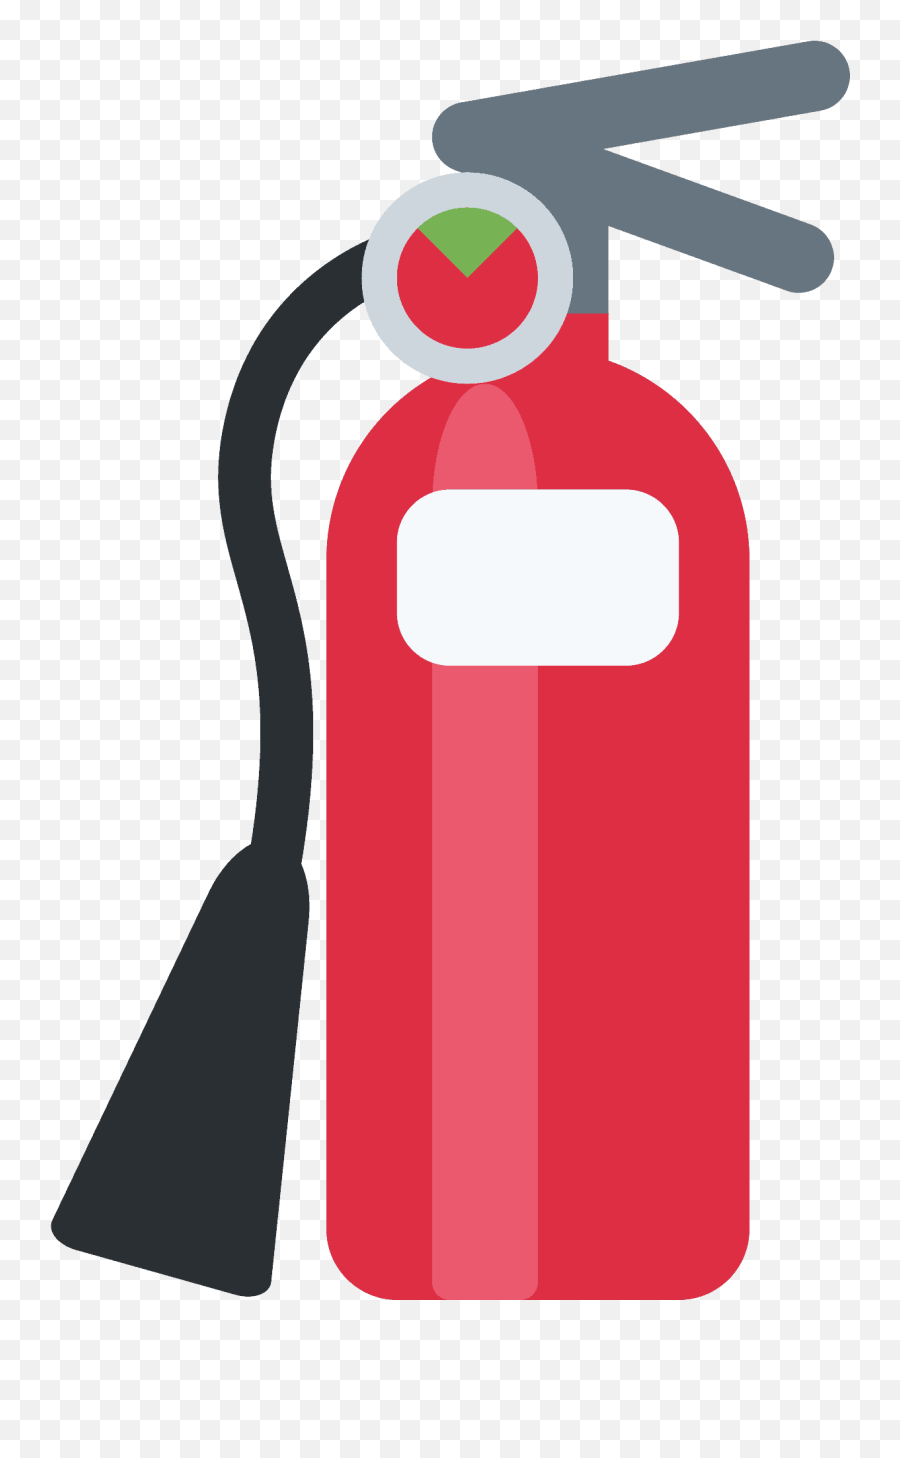 Fire Extinguisher Emoji Meaning With - Fire Extinguisher Emoji,Fire Emoji Png